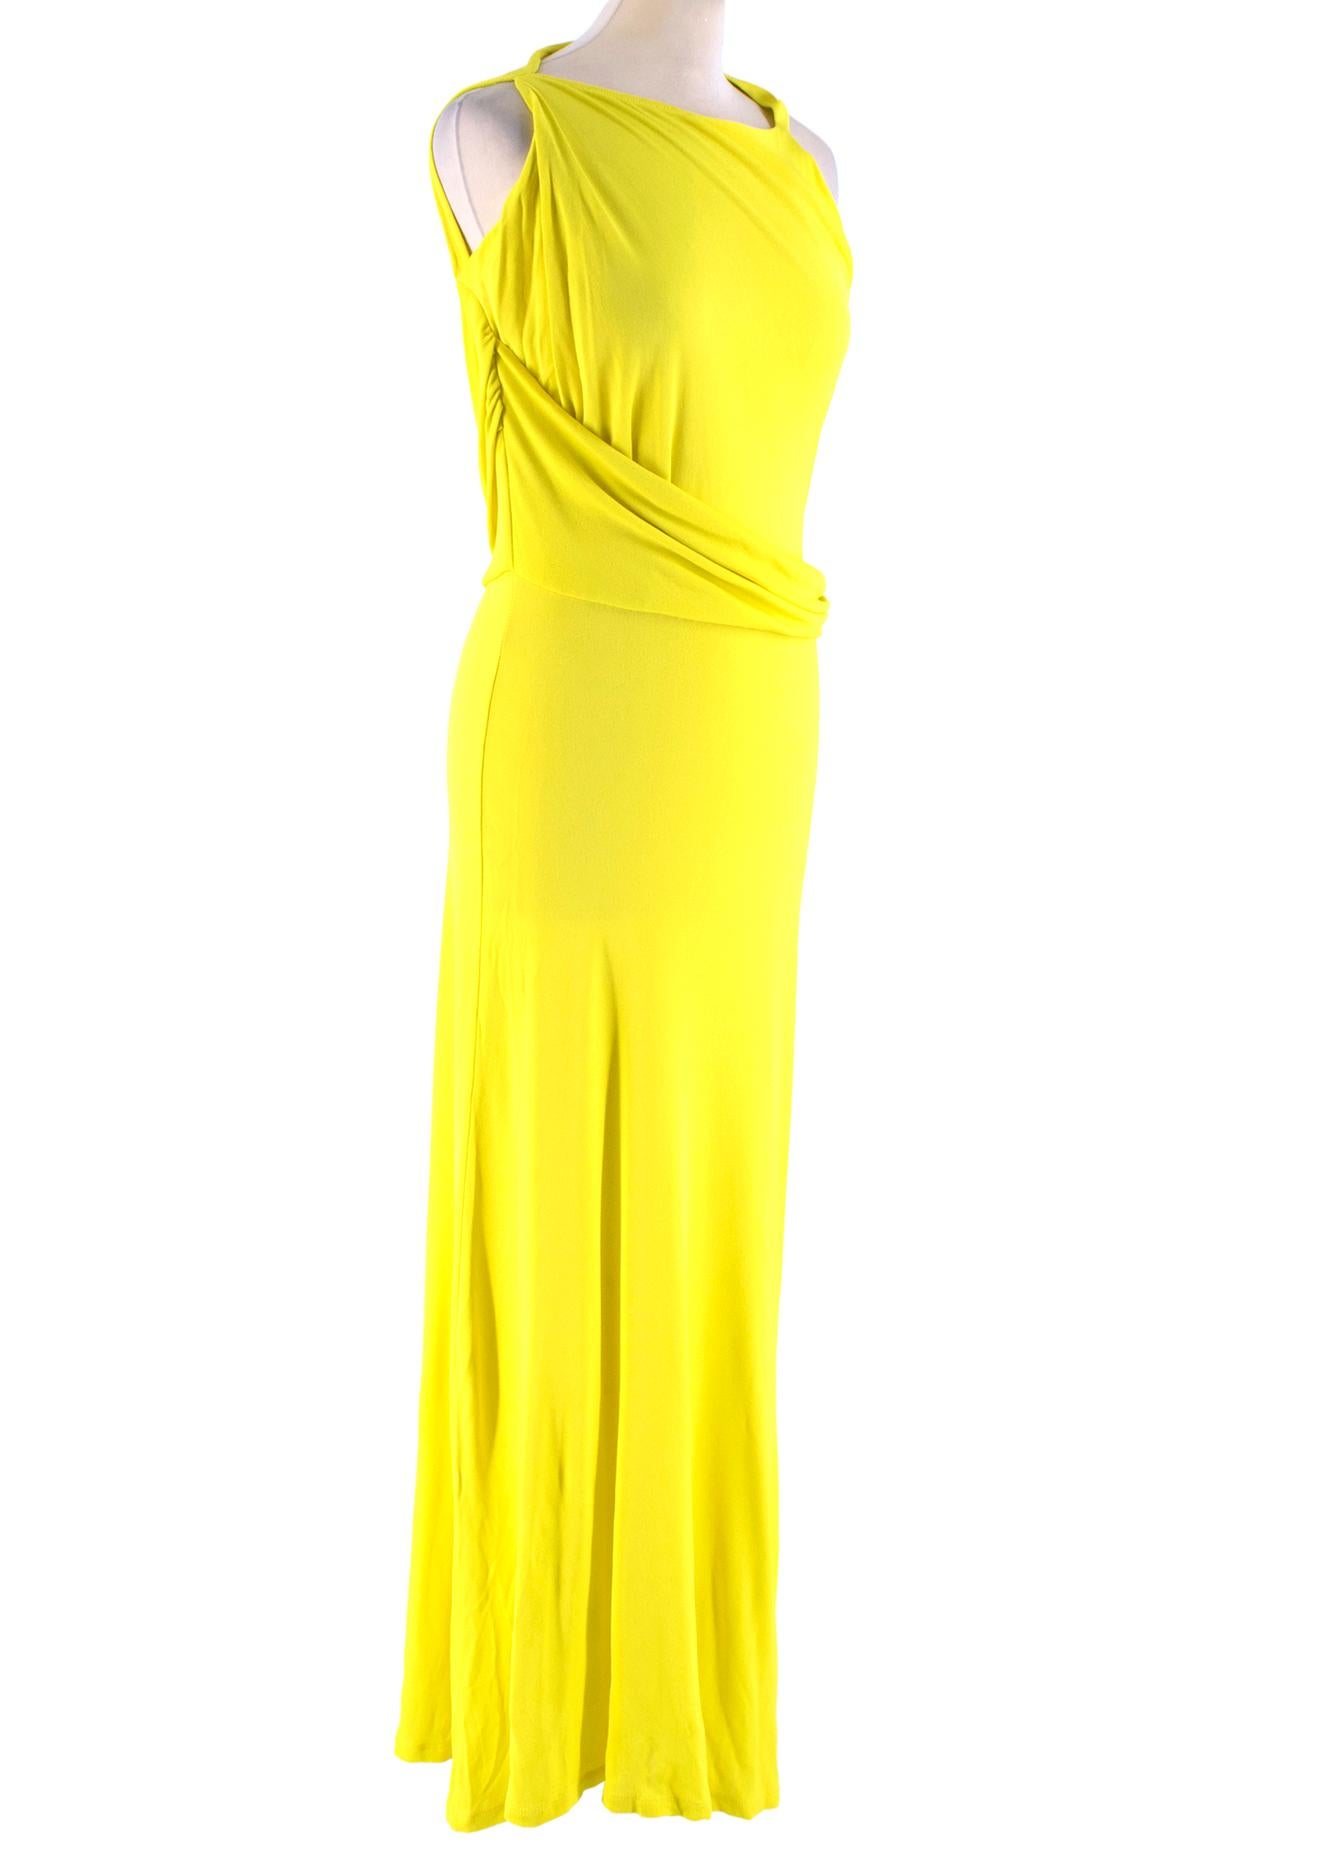 Osman Yellow Poly-blend Draped High Neck Maxi Dress

- Yellow 
-  high and square neck  
- Draping detail to the back and waist 
- Long skirt which drapes to the floor
- Sleevless
- Seam across waistline
- Flared hem

Please note, these items are